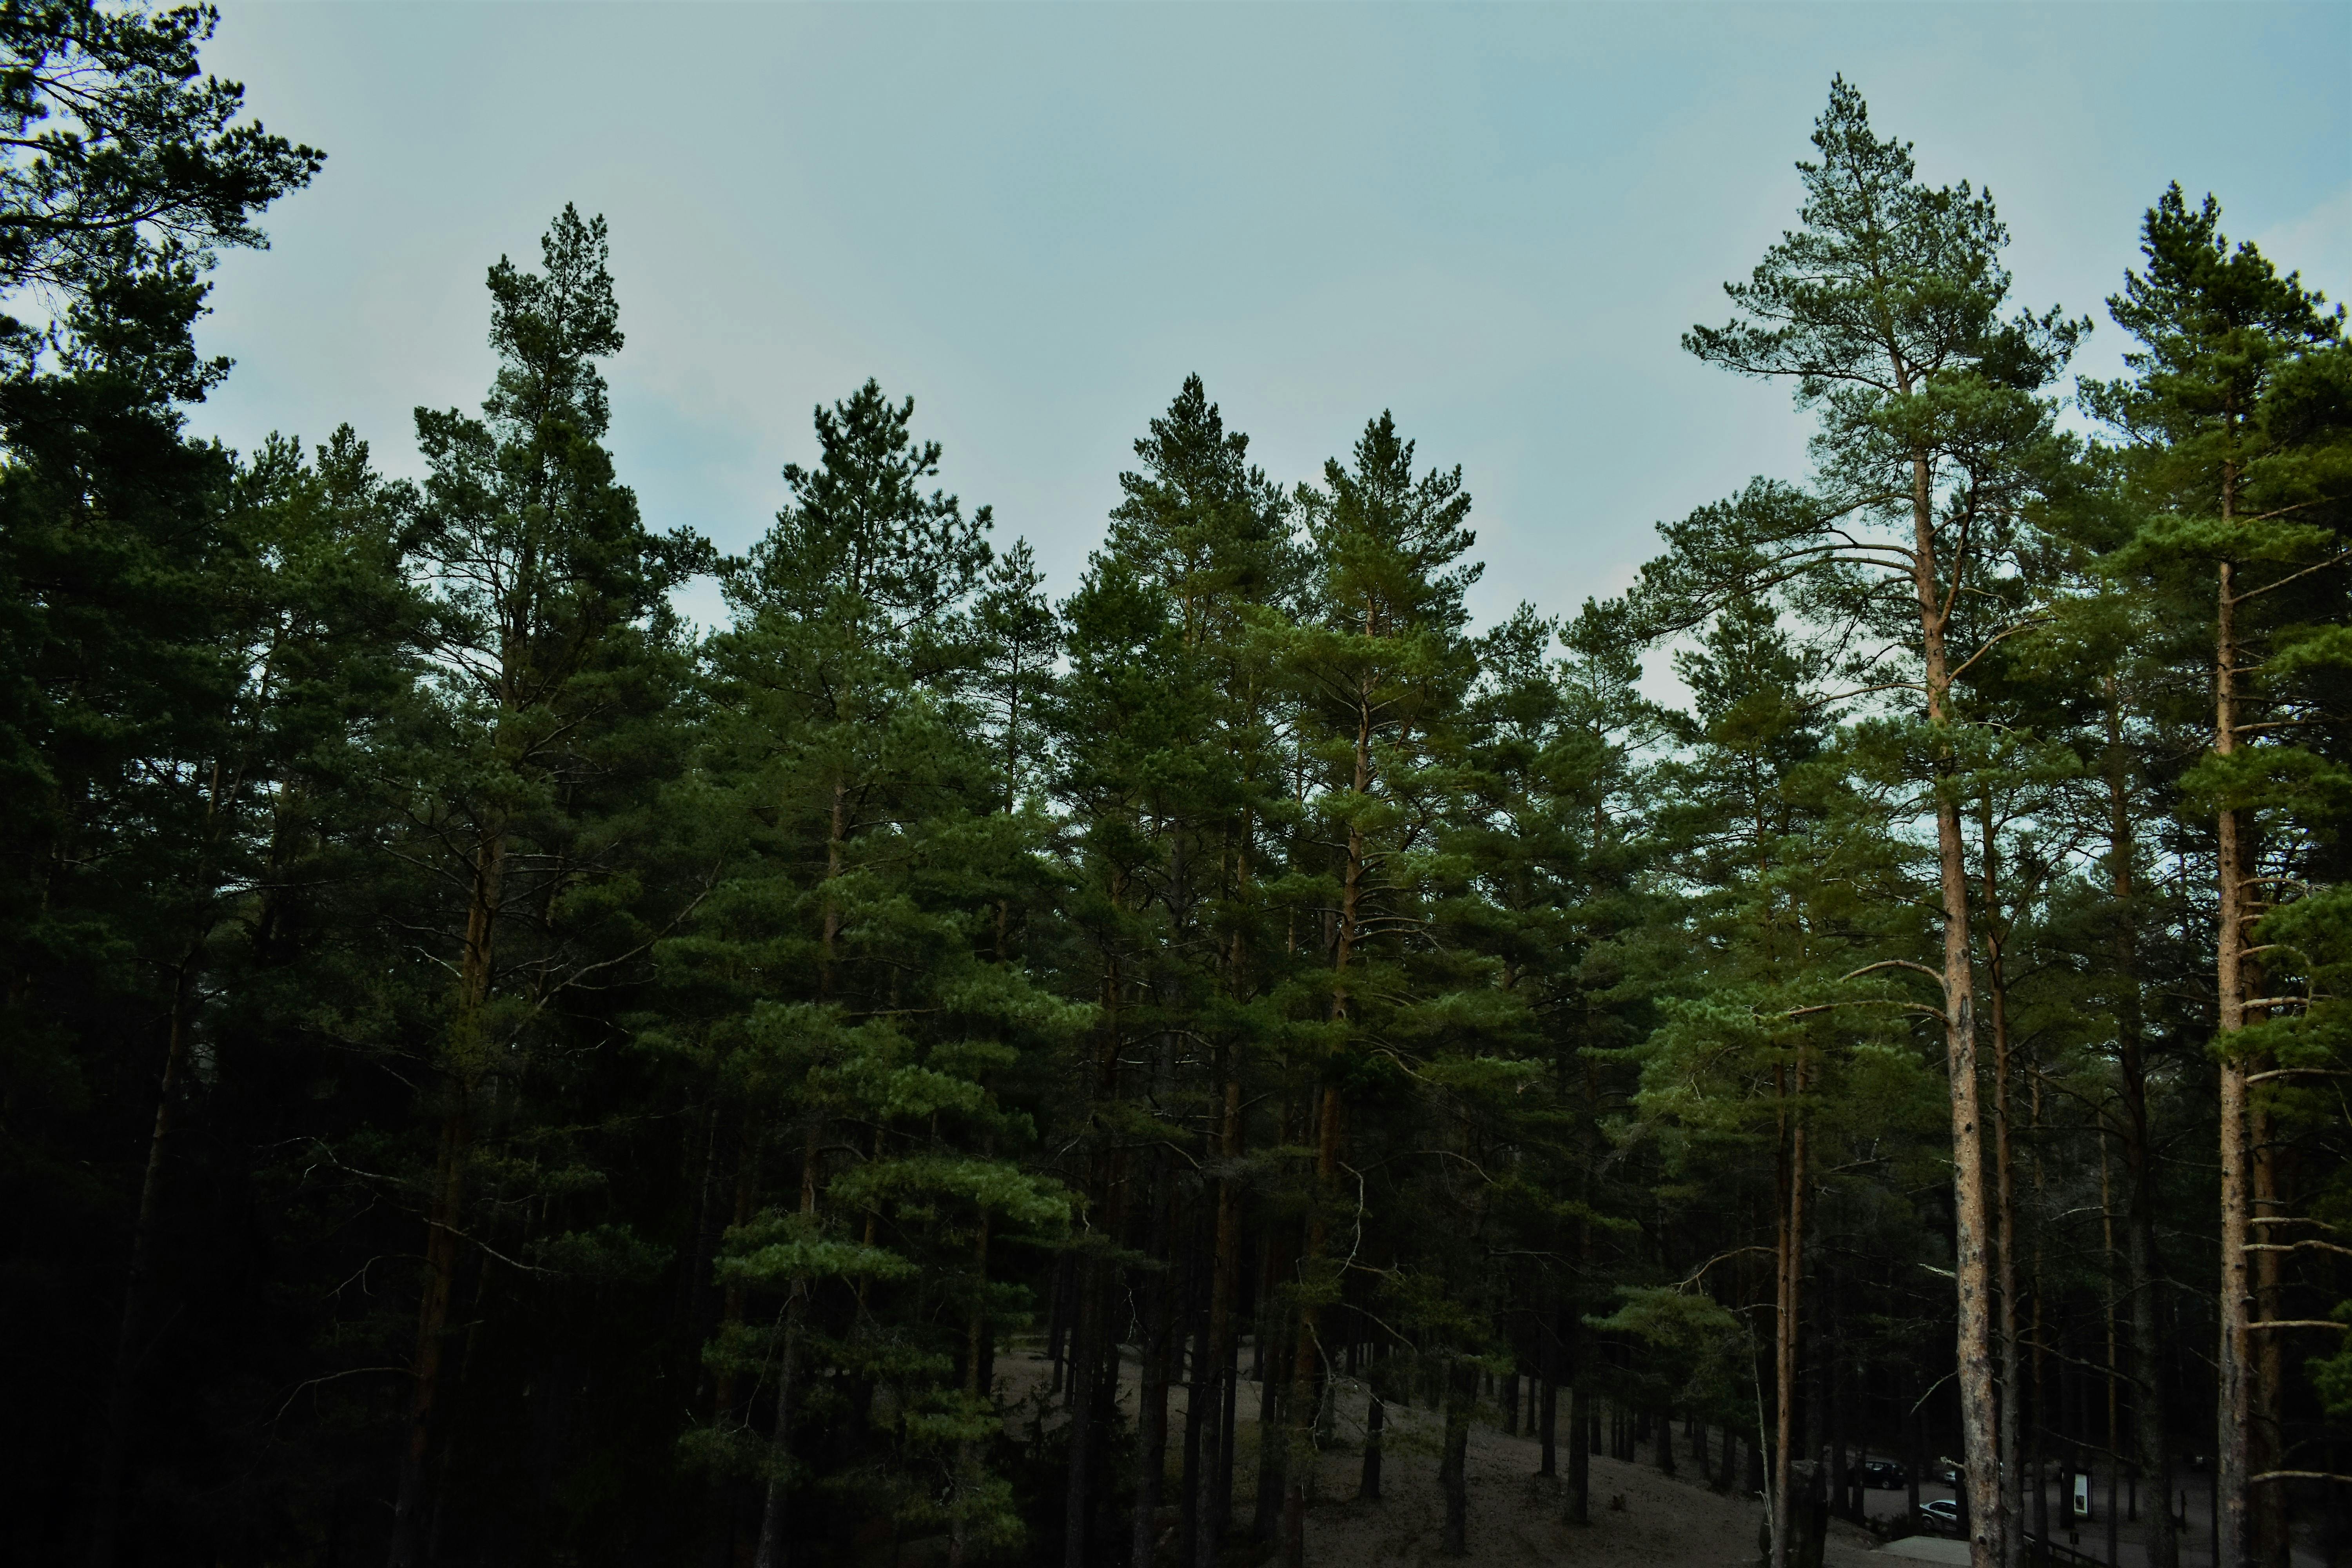 Pine Forest Wallpapers